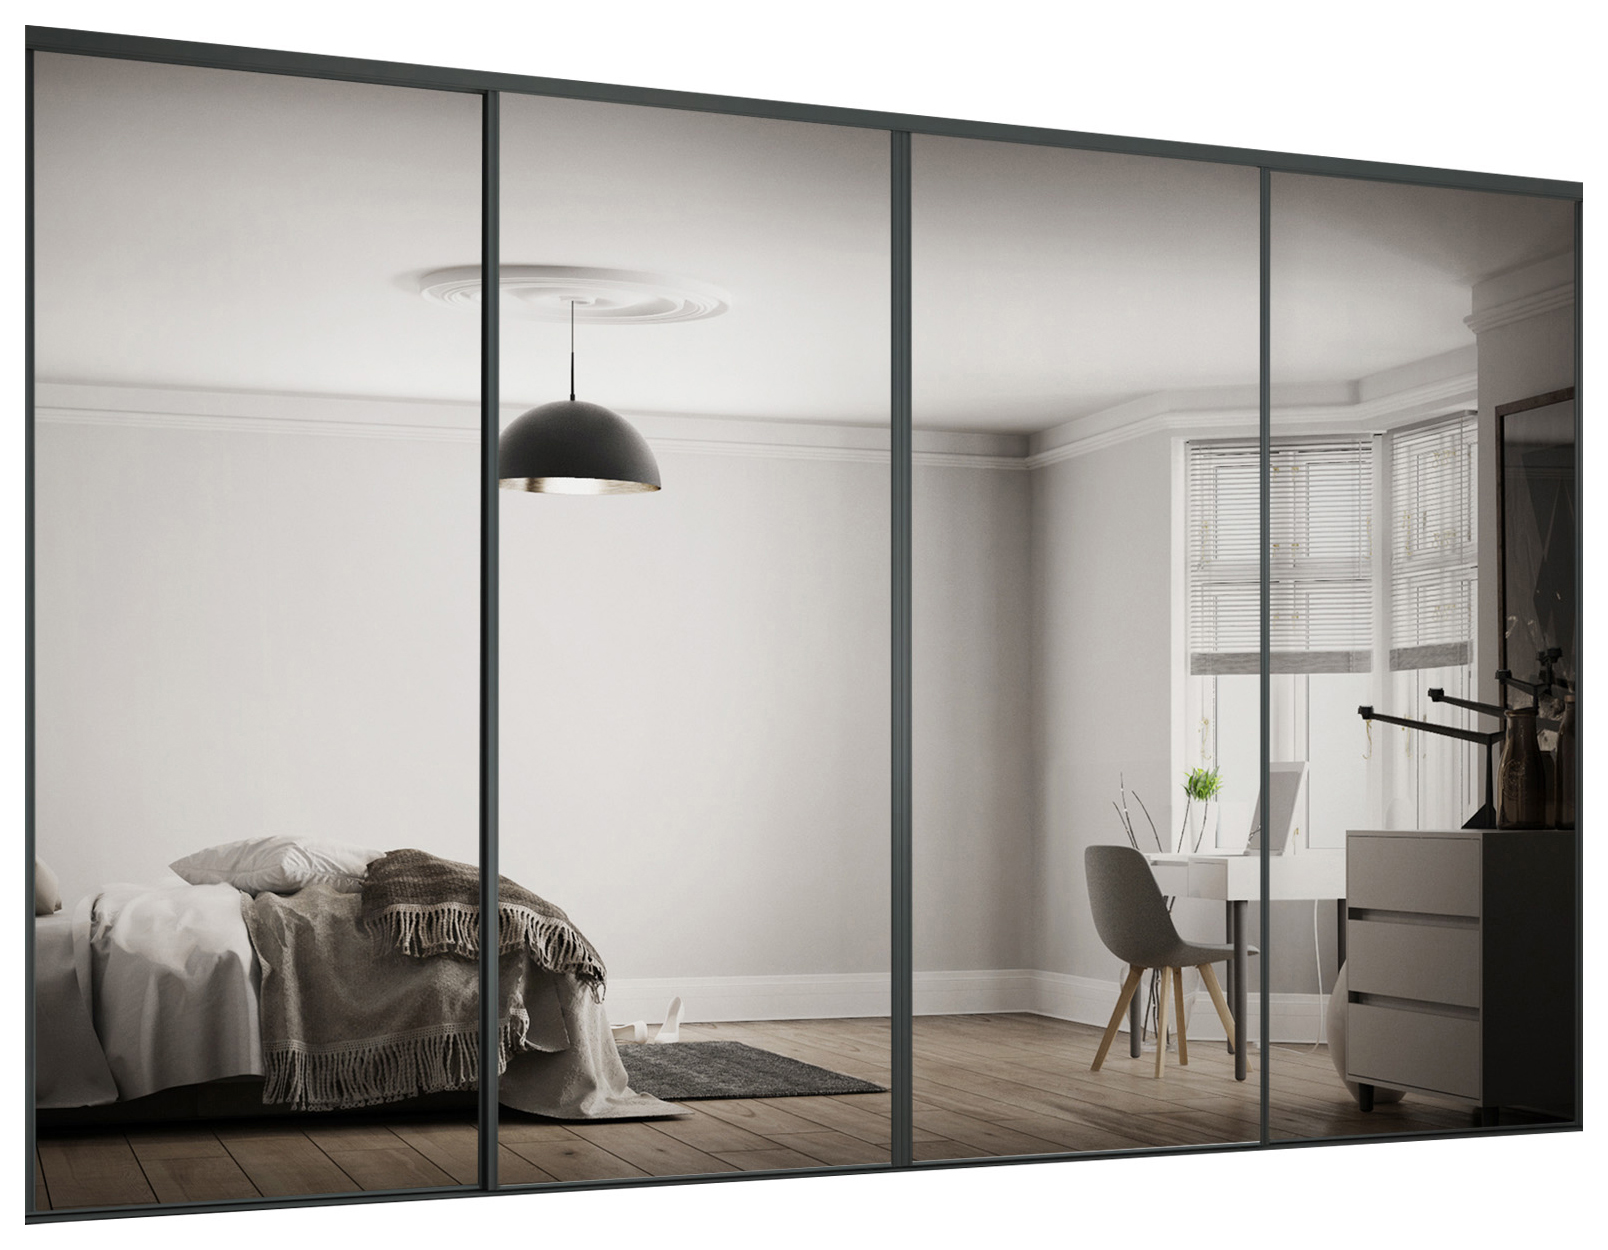 Image of Spacepro Heritage 4 x 914mm Graphite Frame Mirror Sliding Door Kit with Colour Matched Track